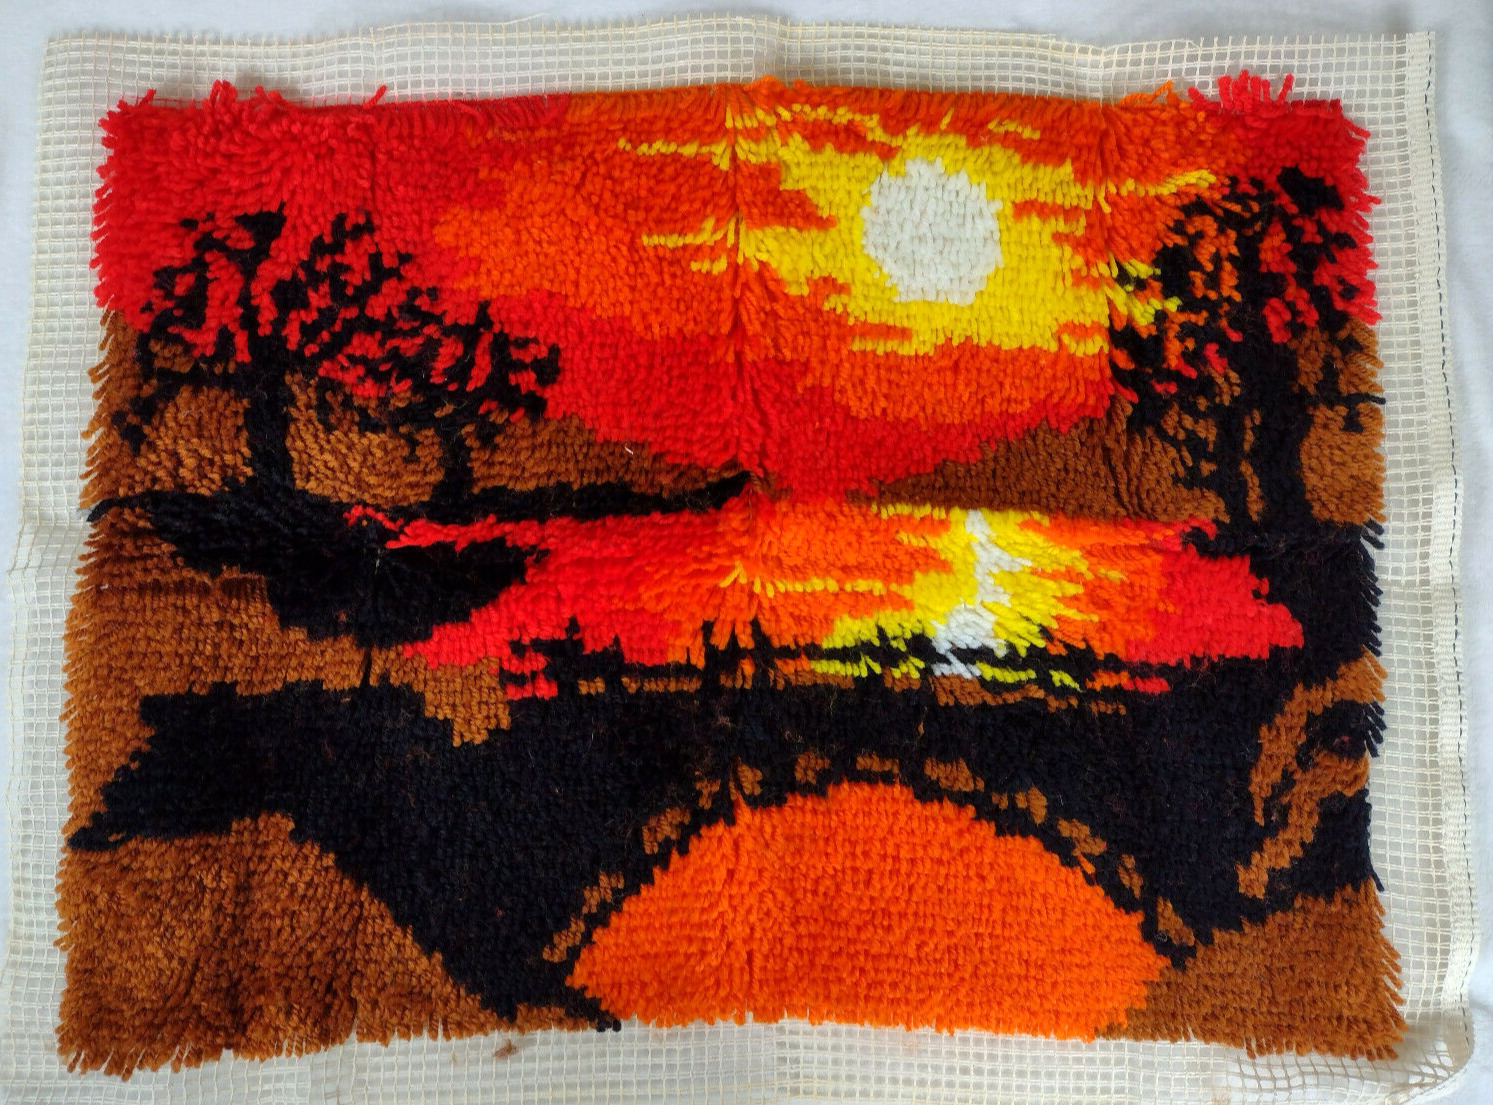 Vintage 70s Sunset Scene Latch Hook Completed Rug Wall Hanging Not Blocked